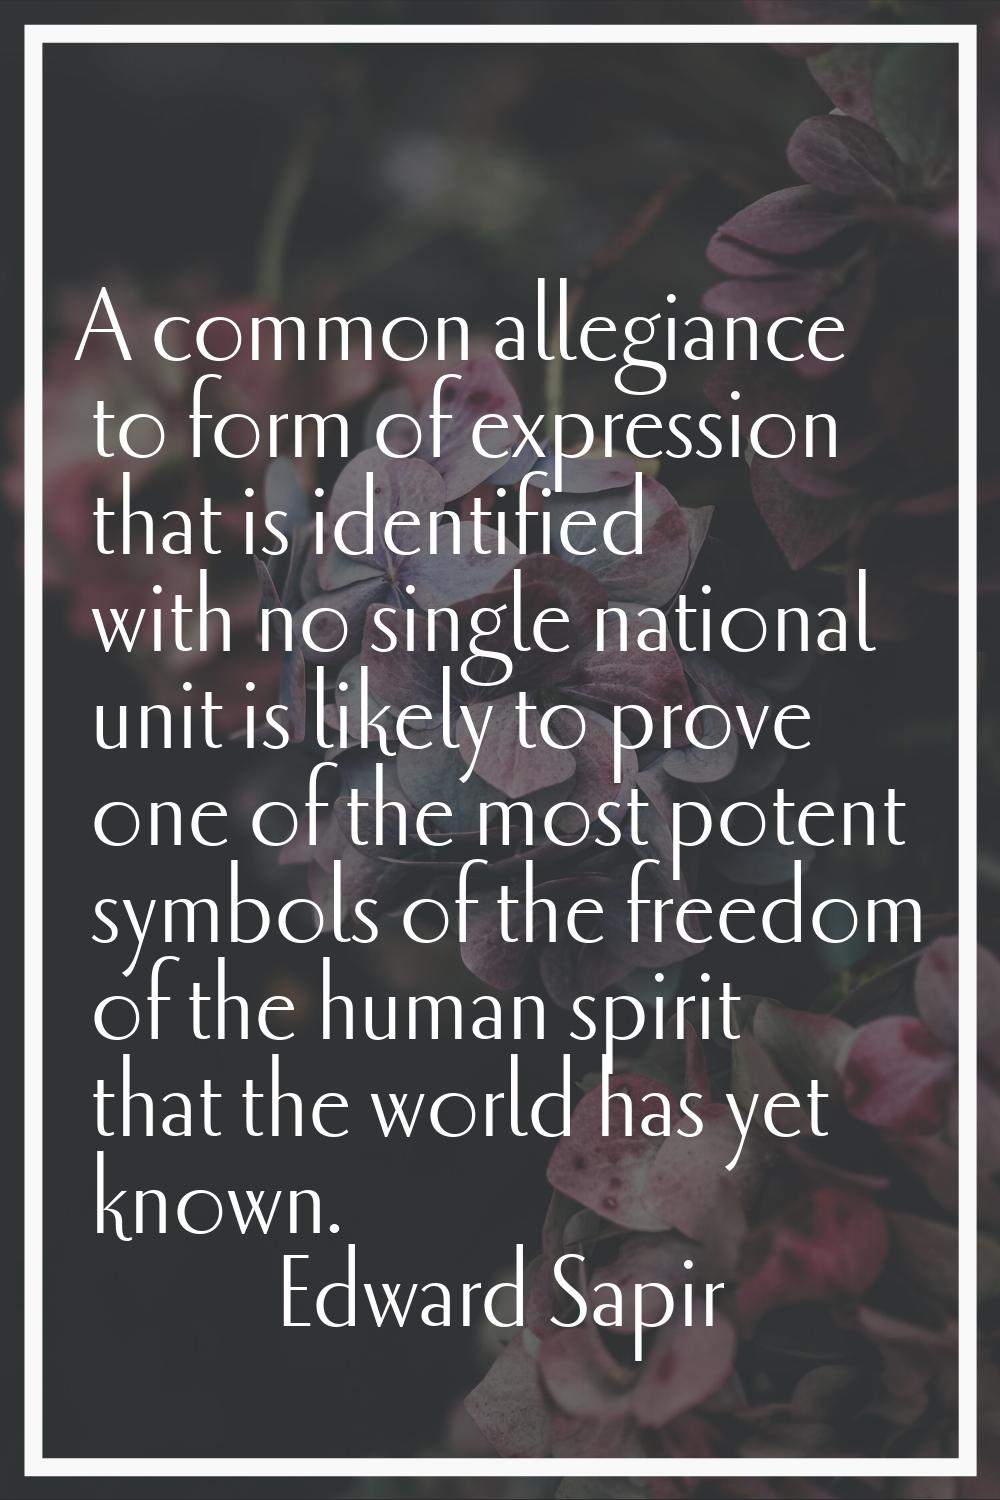 A common allegiance to form of expression that is identified with no single national unit is likely